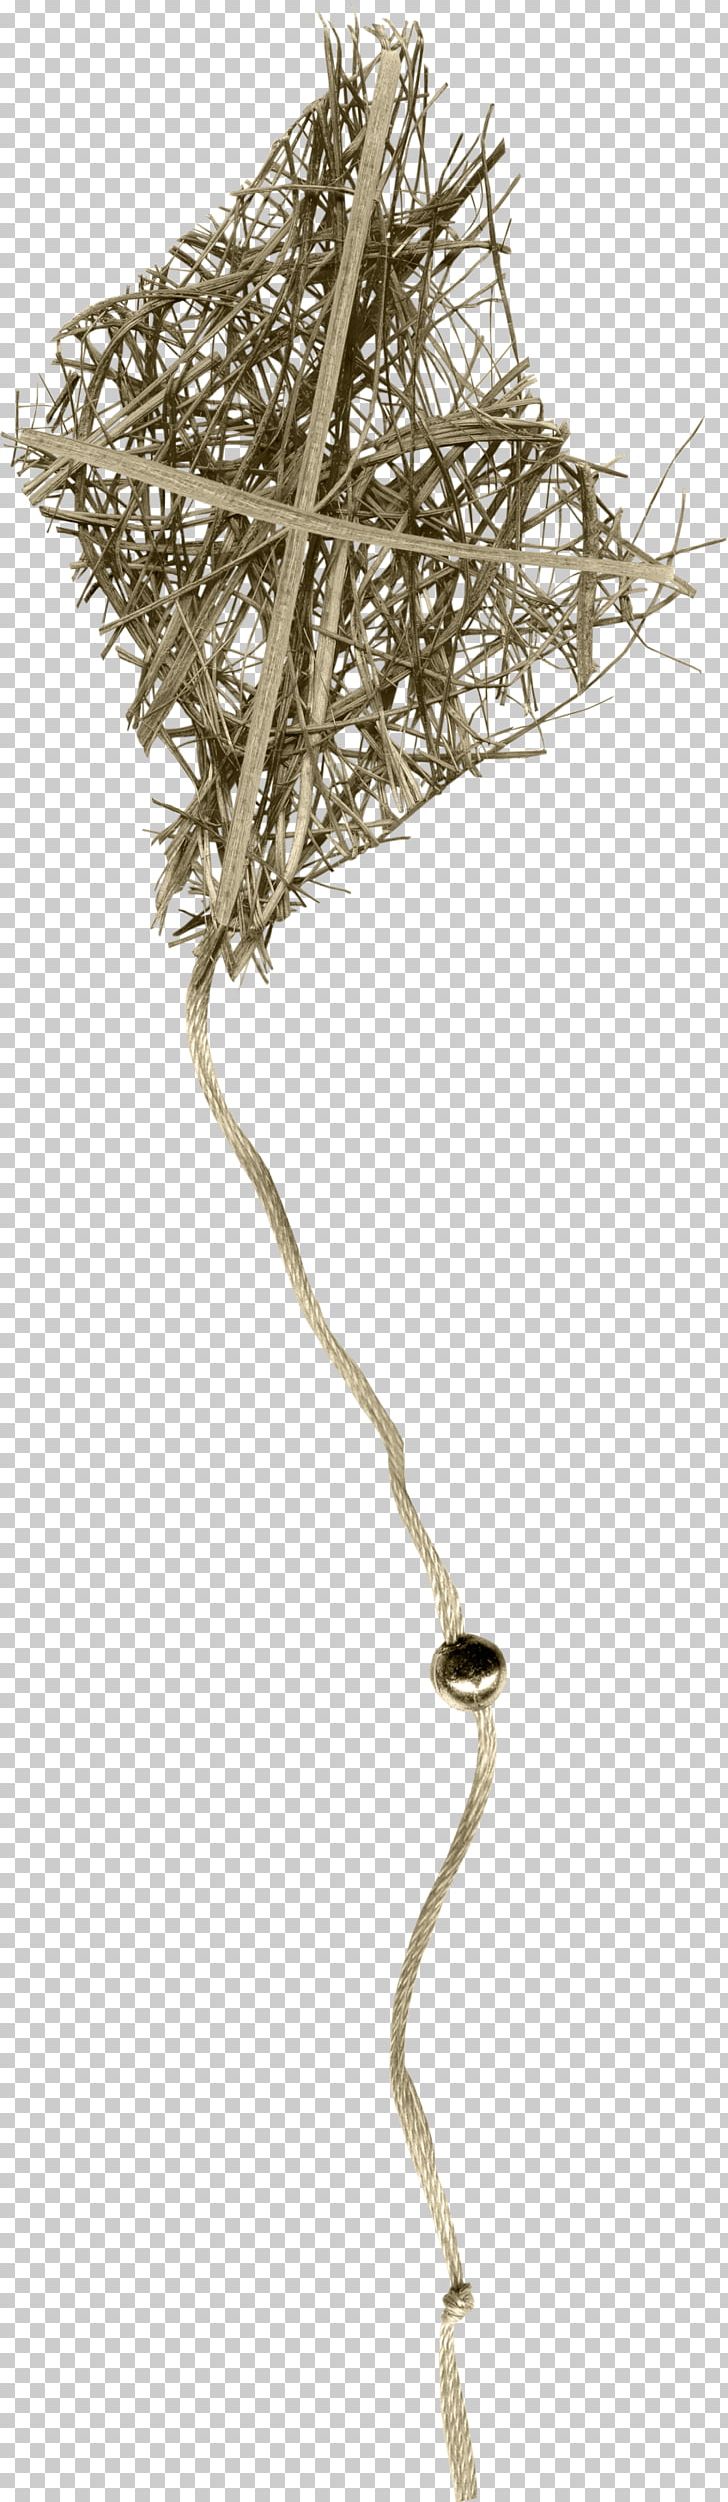 Tree Twig Plant Stem Branching PNG, Clipart, Branch, Branching, Foliage, Nature, Plant Free PNG Download